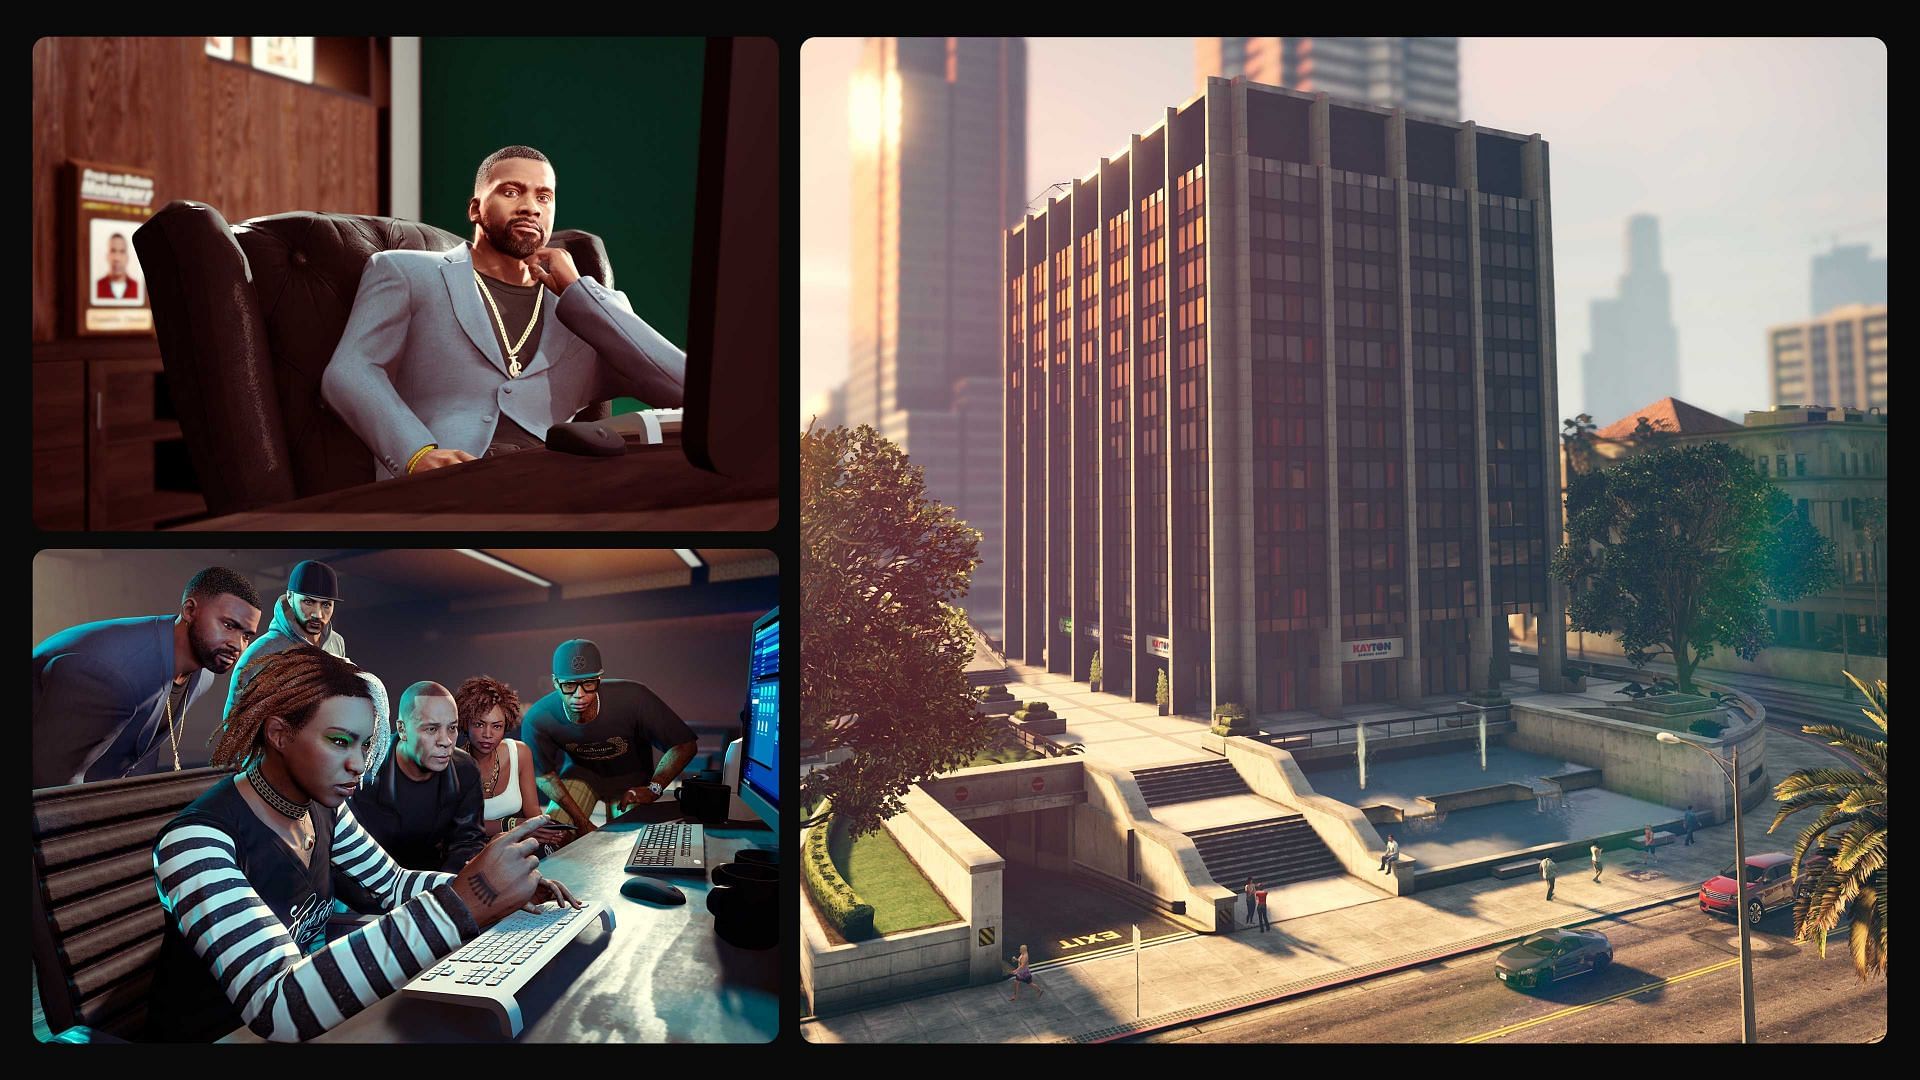 Some screenshots related to the Agency (Image via Rockstar Games)